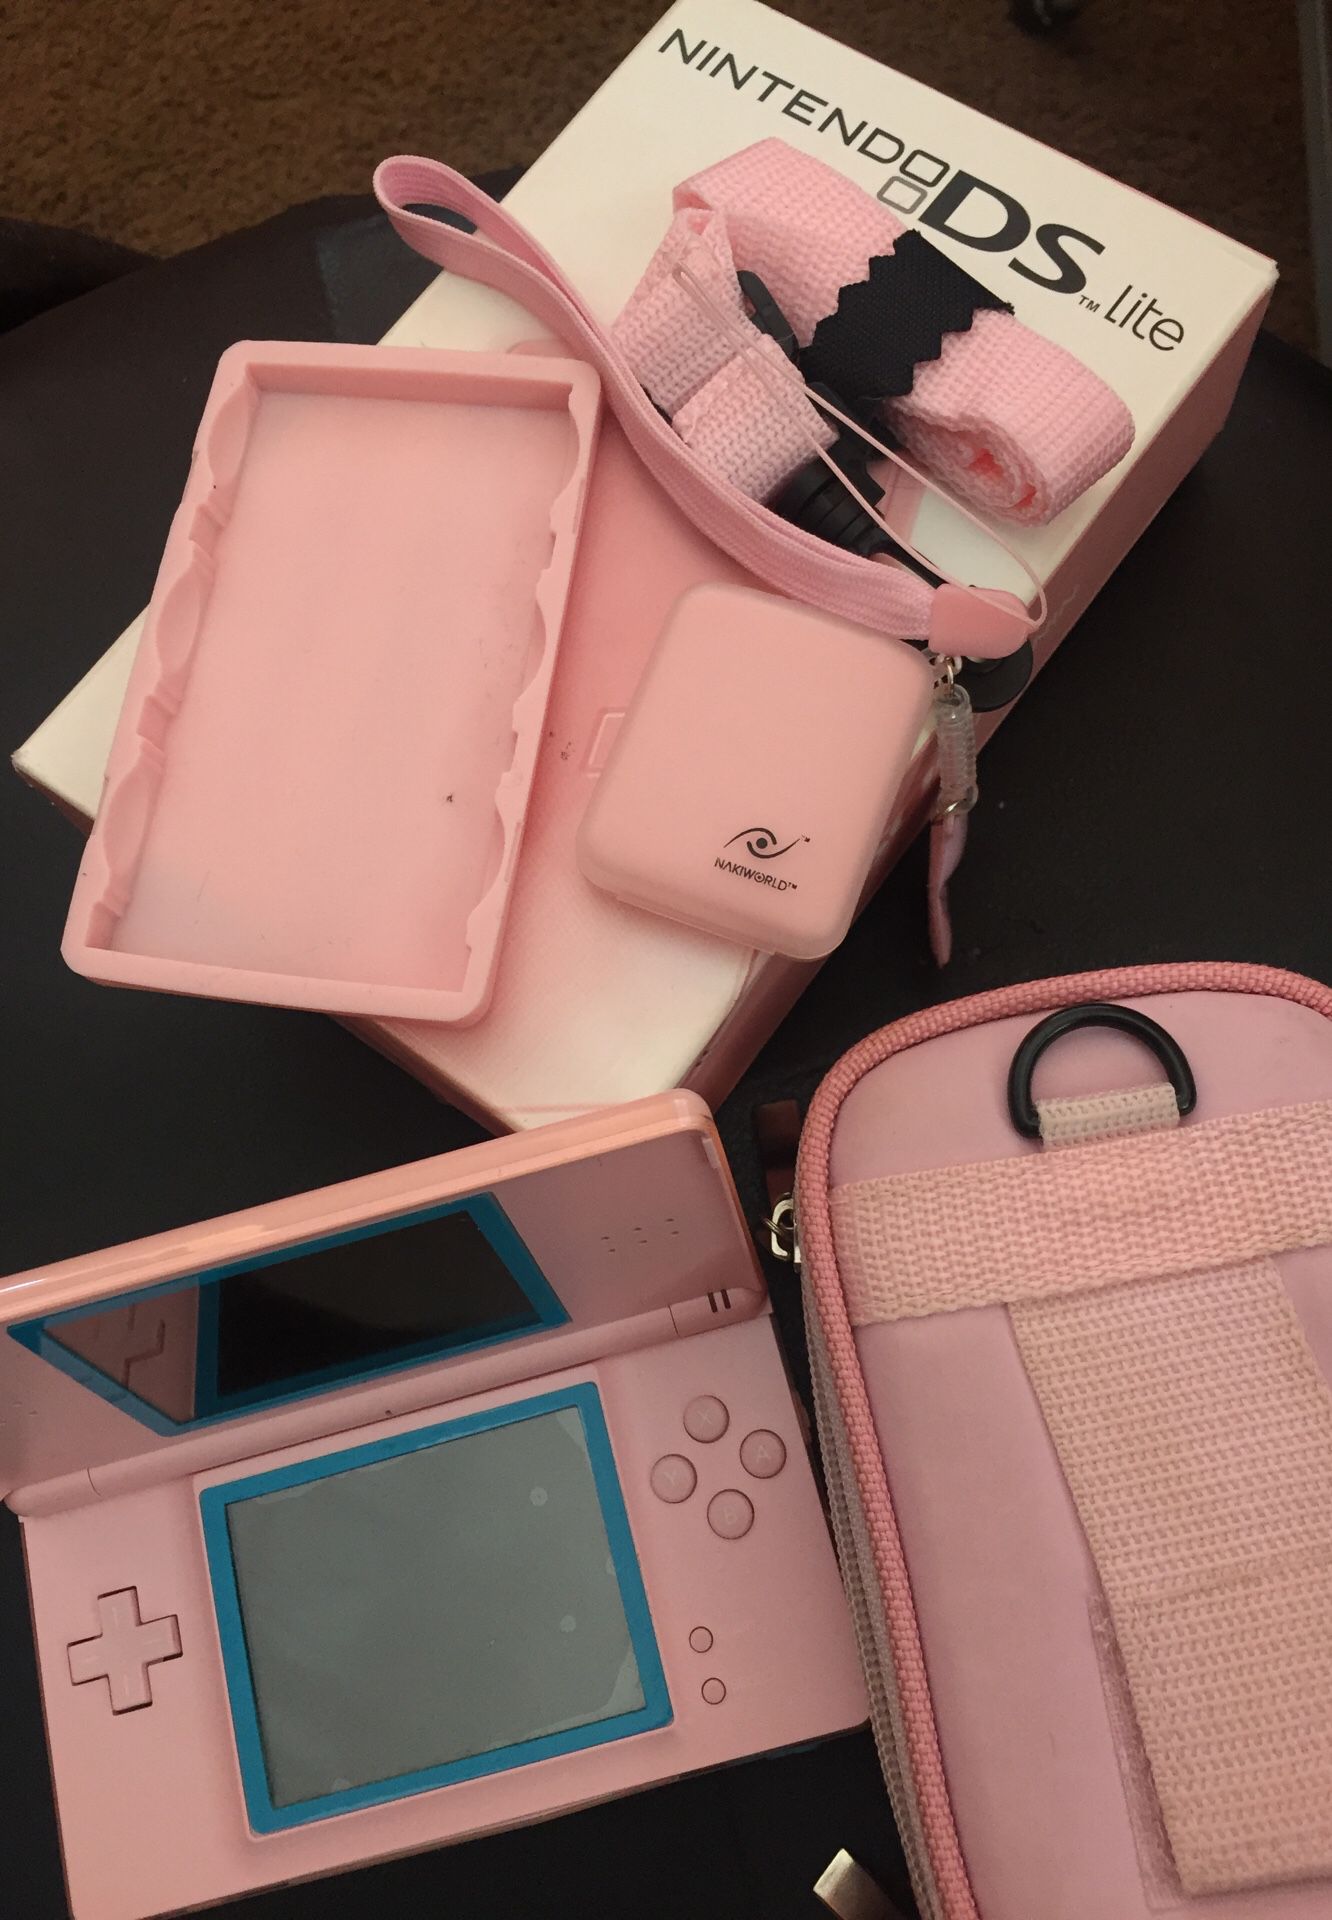 RARE PINK NINTENDO DS LITE CASE AND PORTABLE GAME CONSOLE